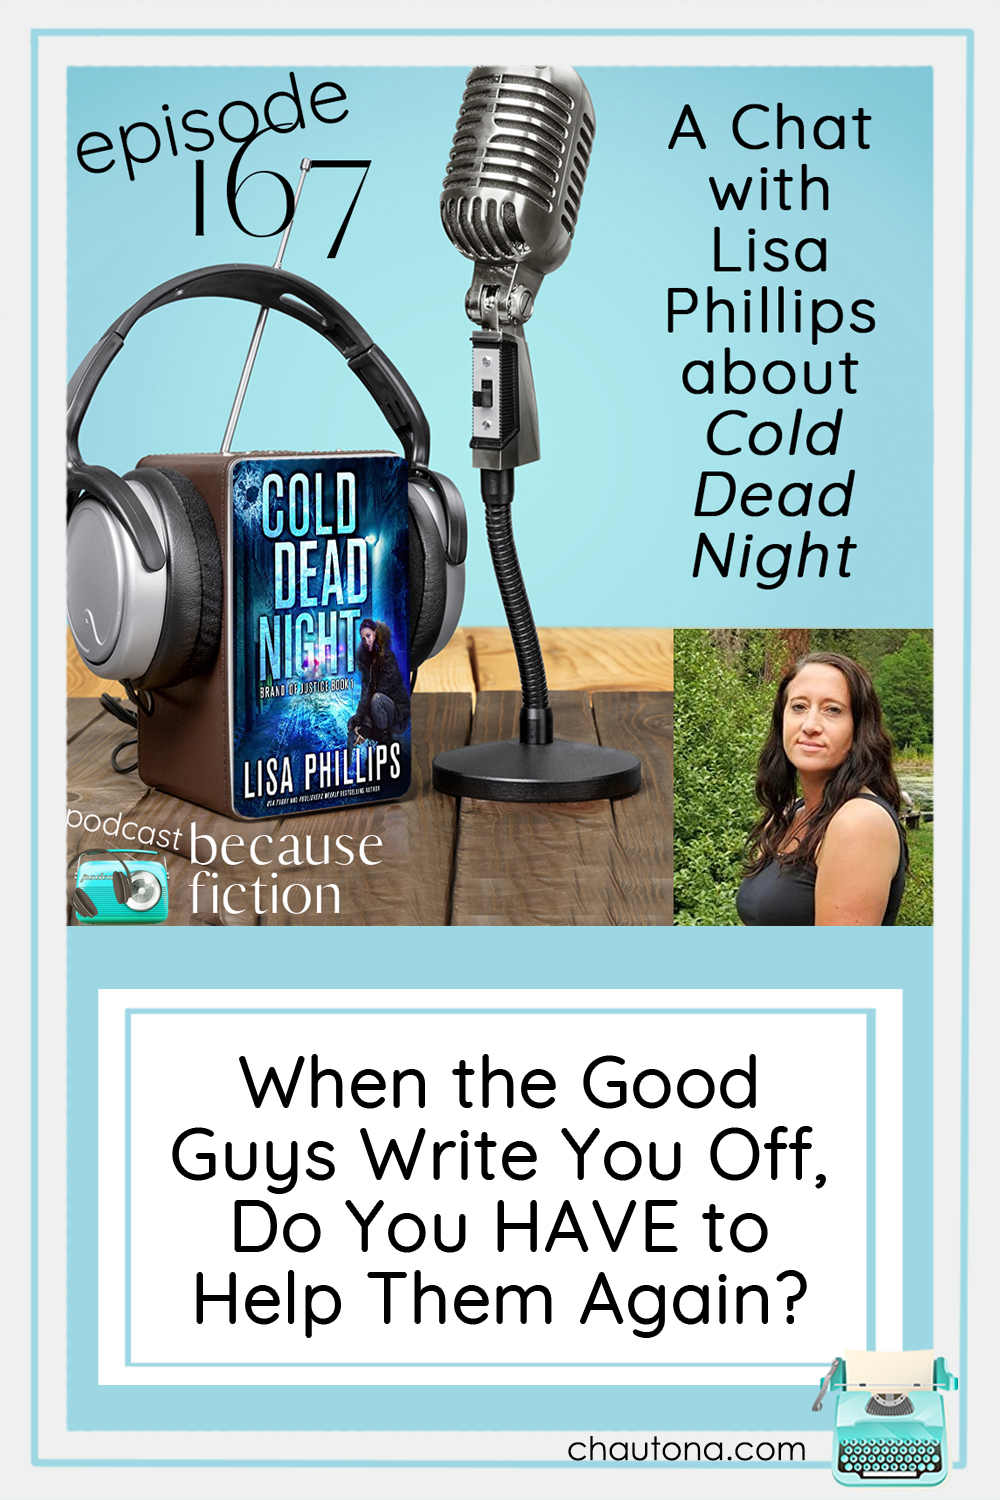 Lisa Phillips has a fascinating new series releasing on Tuesday with Cold Dead Night! The Brand of Justice Series promises to be great! via @chautonahavig